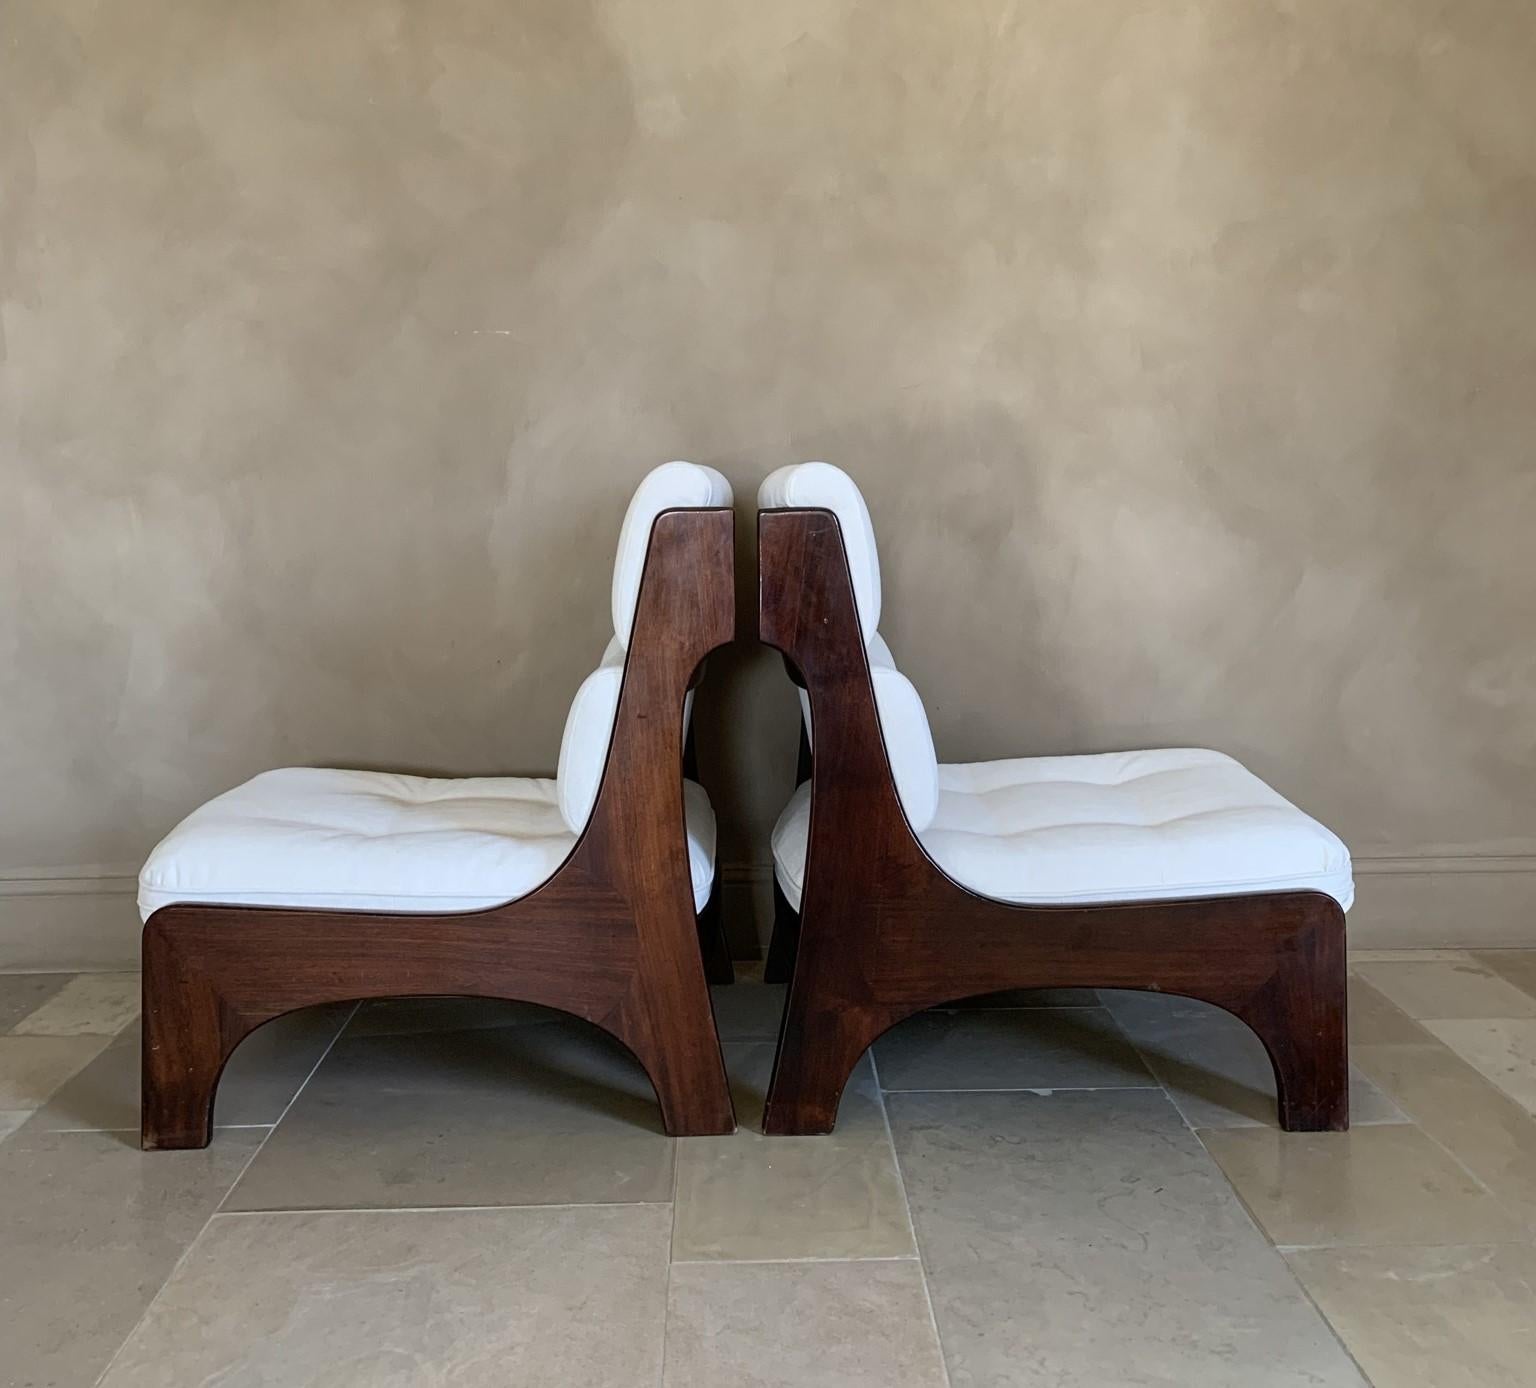 A high quality pair of Italian lounge chairs, circa 1965. Hand assembled in solid rosewood these chairs resonate stylish Italian craftmanship and design. They are concieved in a subtle cubist style with lots of eye for detail. The woodconnections